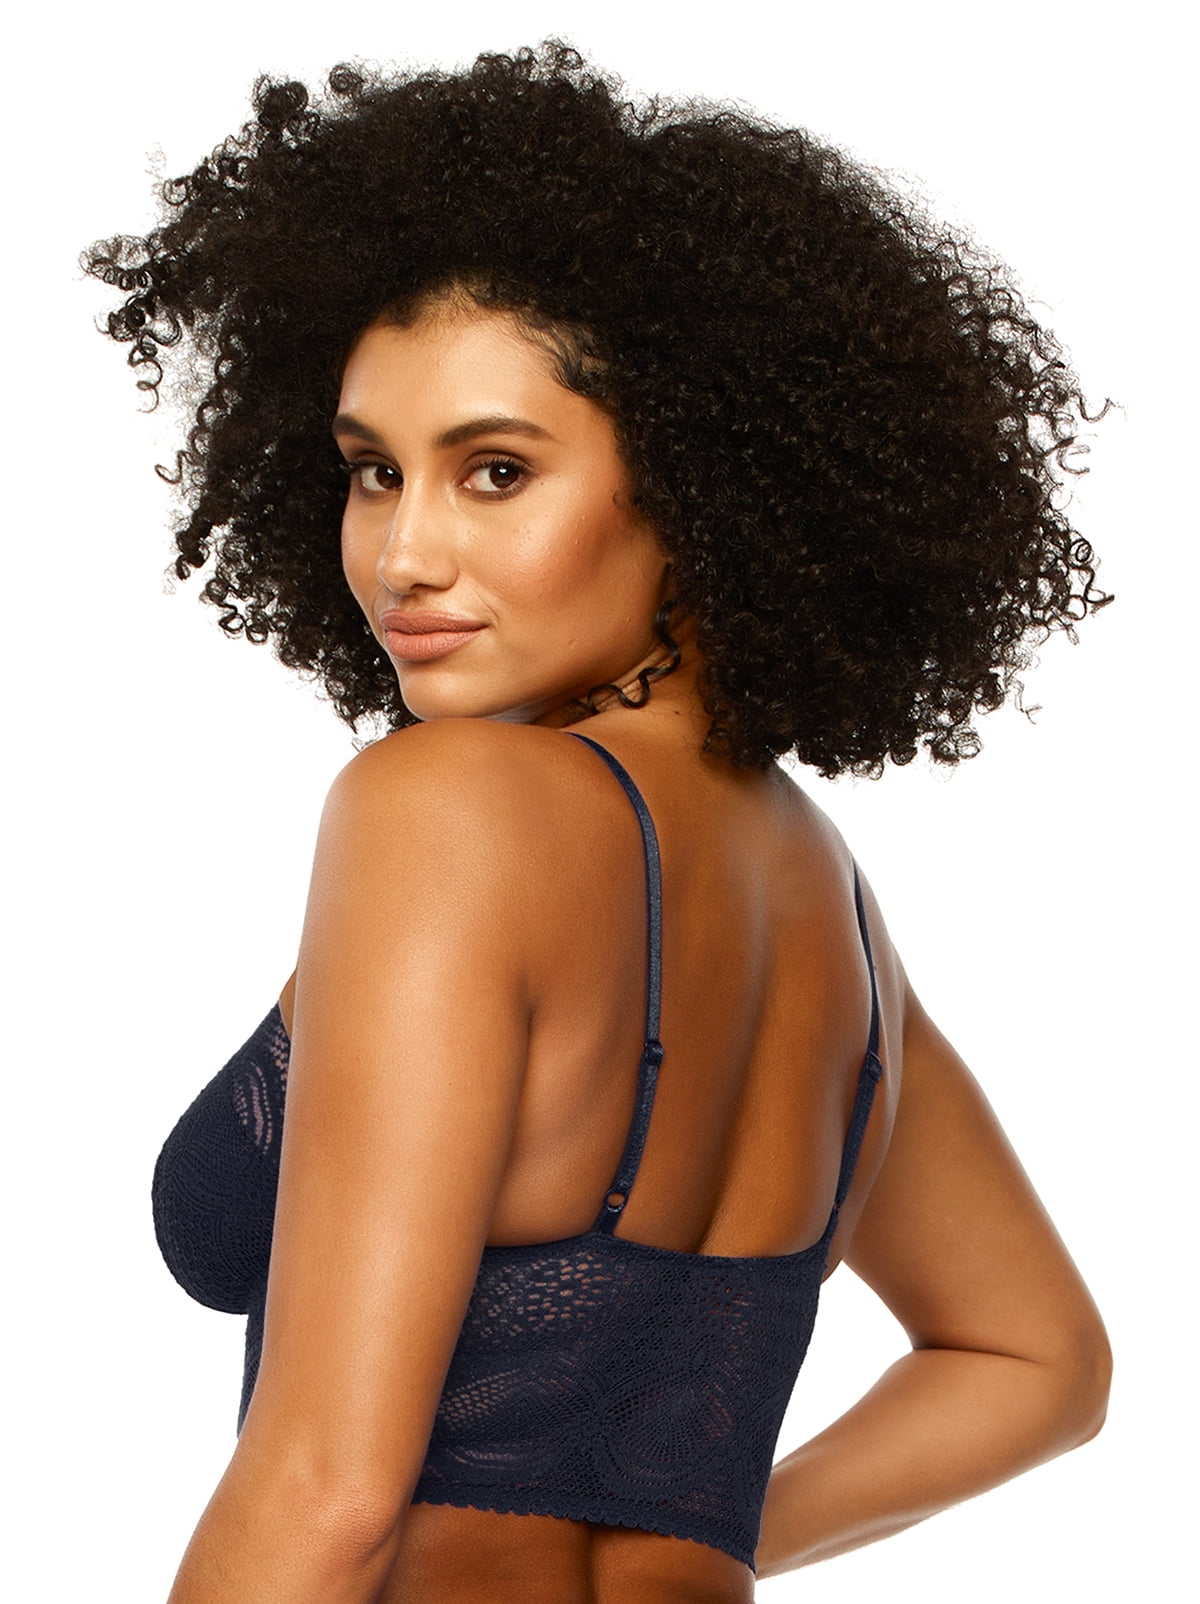 Felina Finesse Cami Bralette - Stretchy Lace Bralettes For Women - Sexy and  Comfortable - Inclusive Sizing, From Small To Plus Size. (French Navy